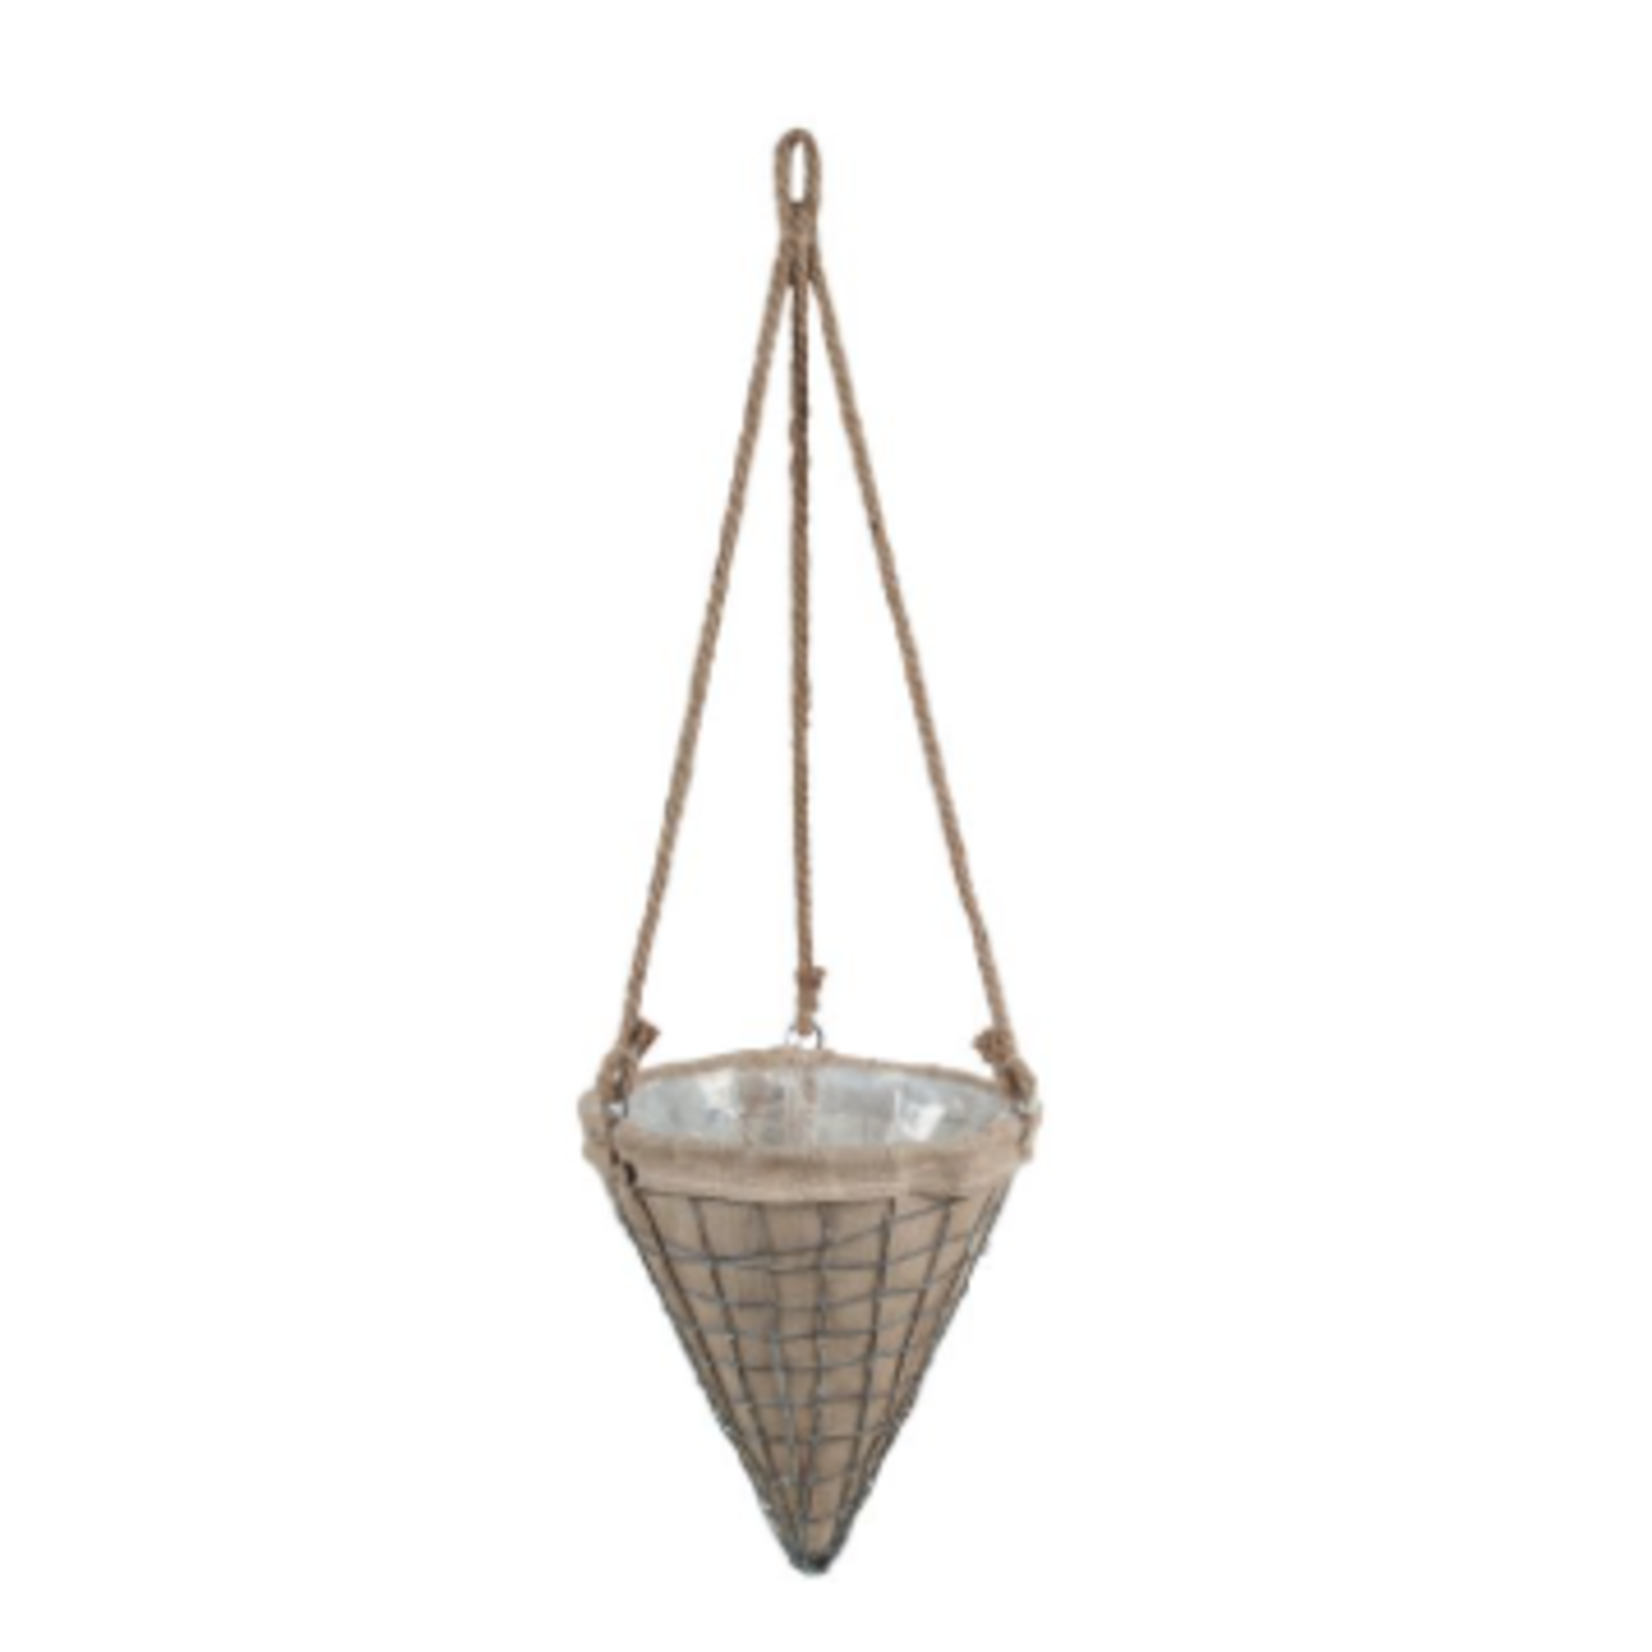 10.5"d x 12"h x 24"rope CONE METAL WIRE HANG WITH BURLAP, reg $12.99